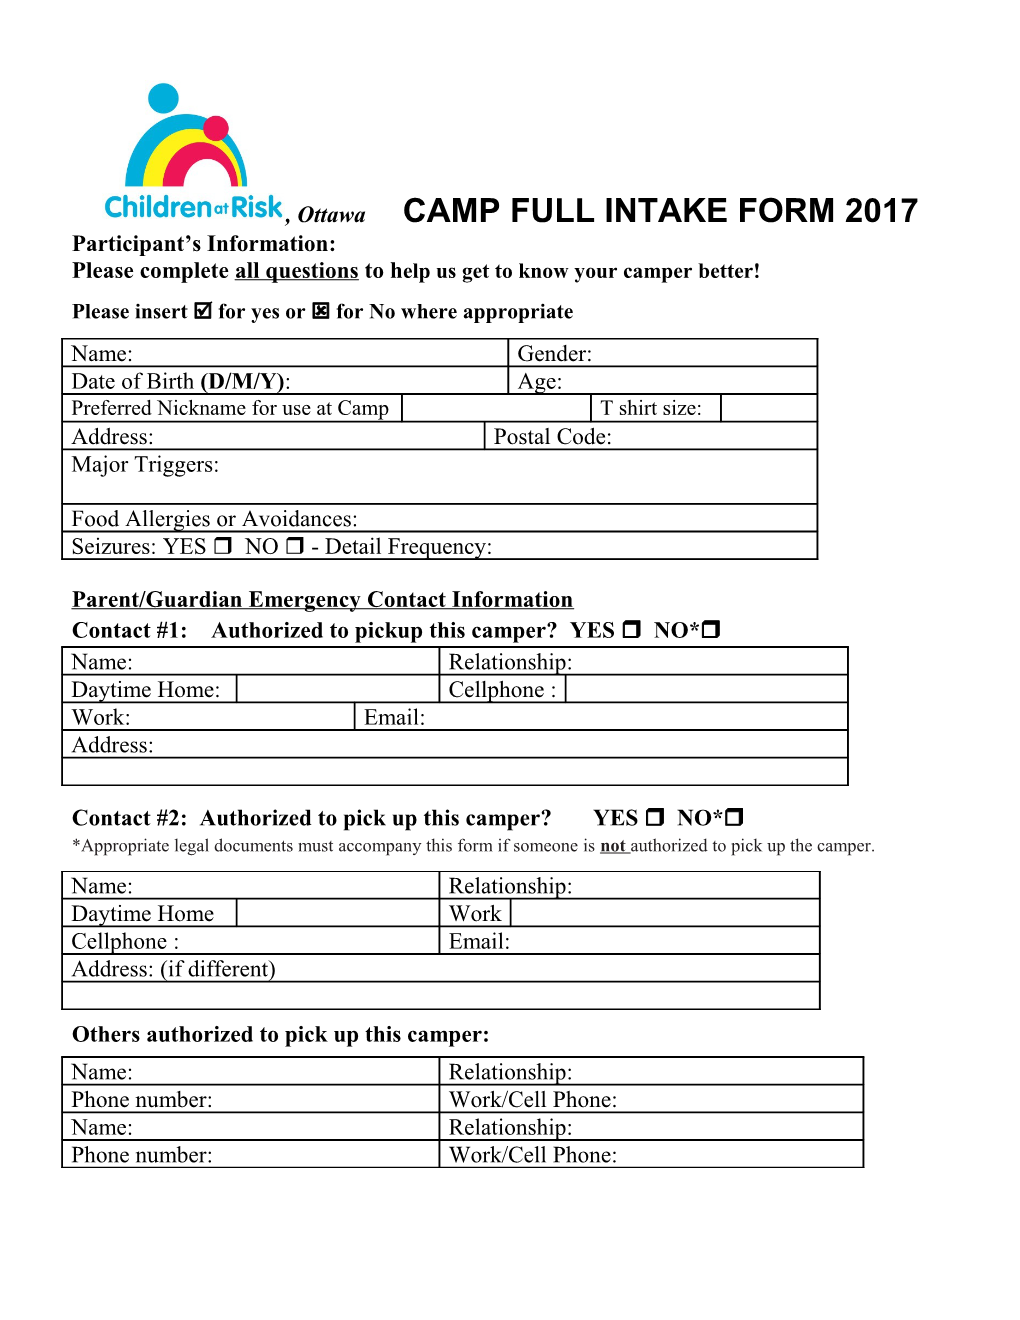 Please Complete All Questions to Help Usget to Know Your Camper Better!